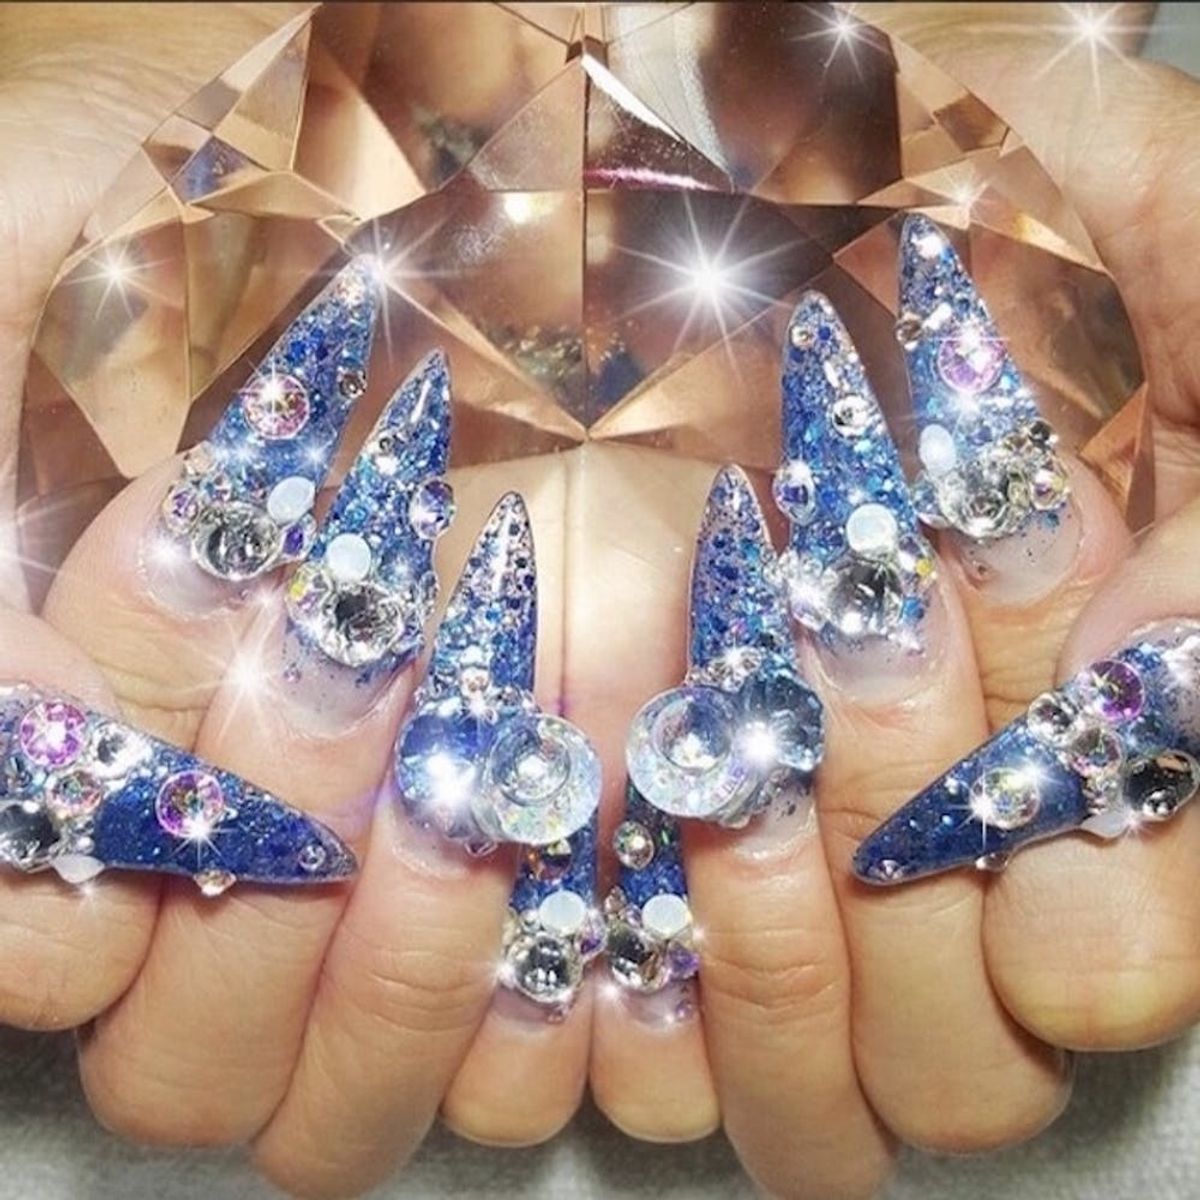 These Snow Globe Nails Are the Most Festive Way to Decorate Your Fingertips